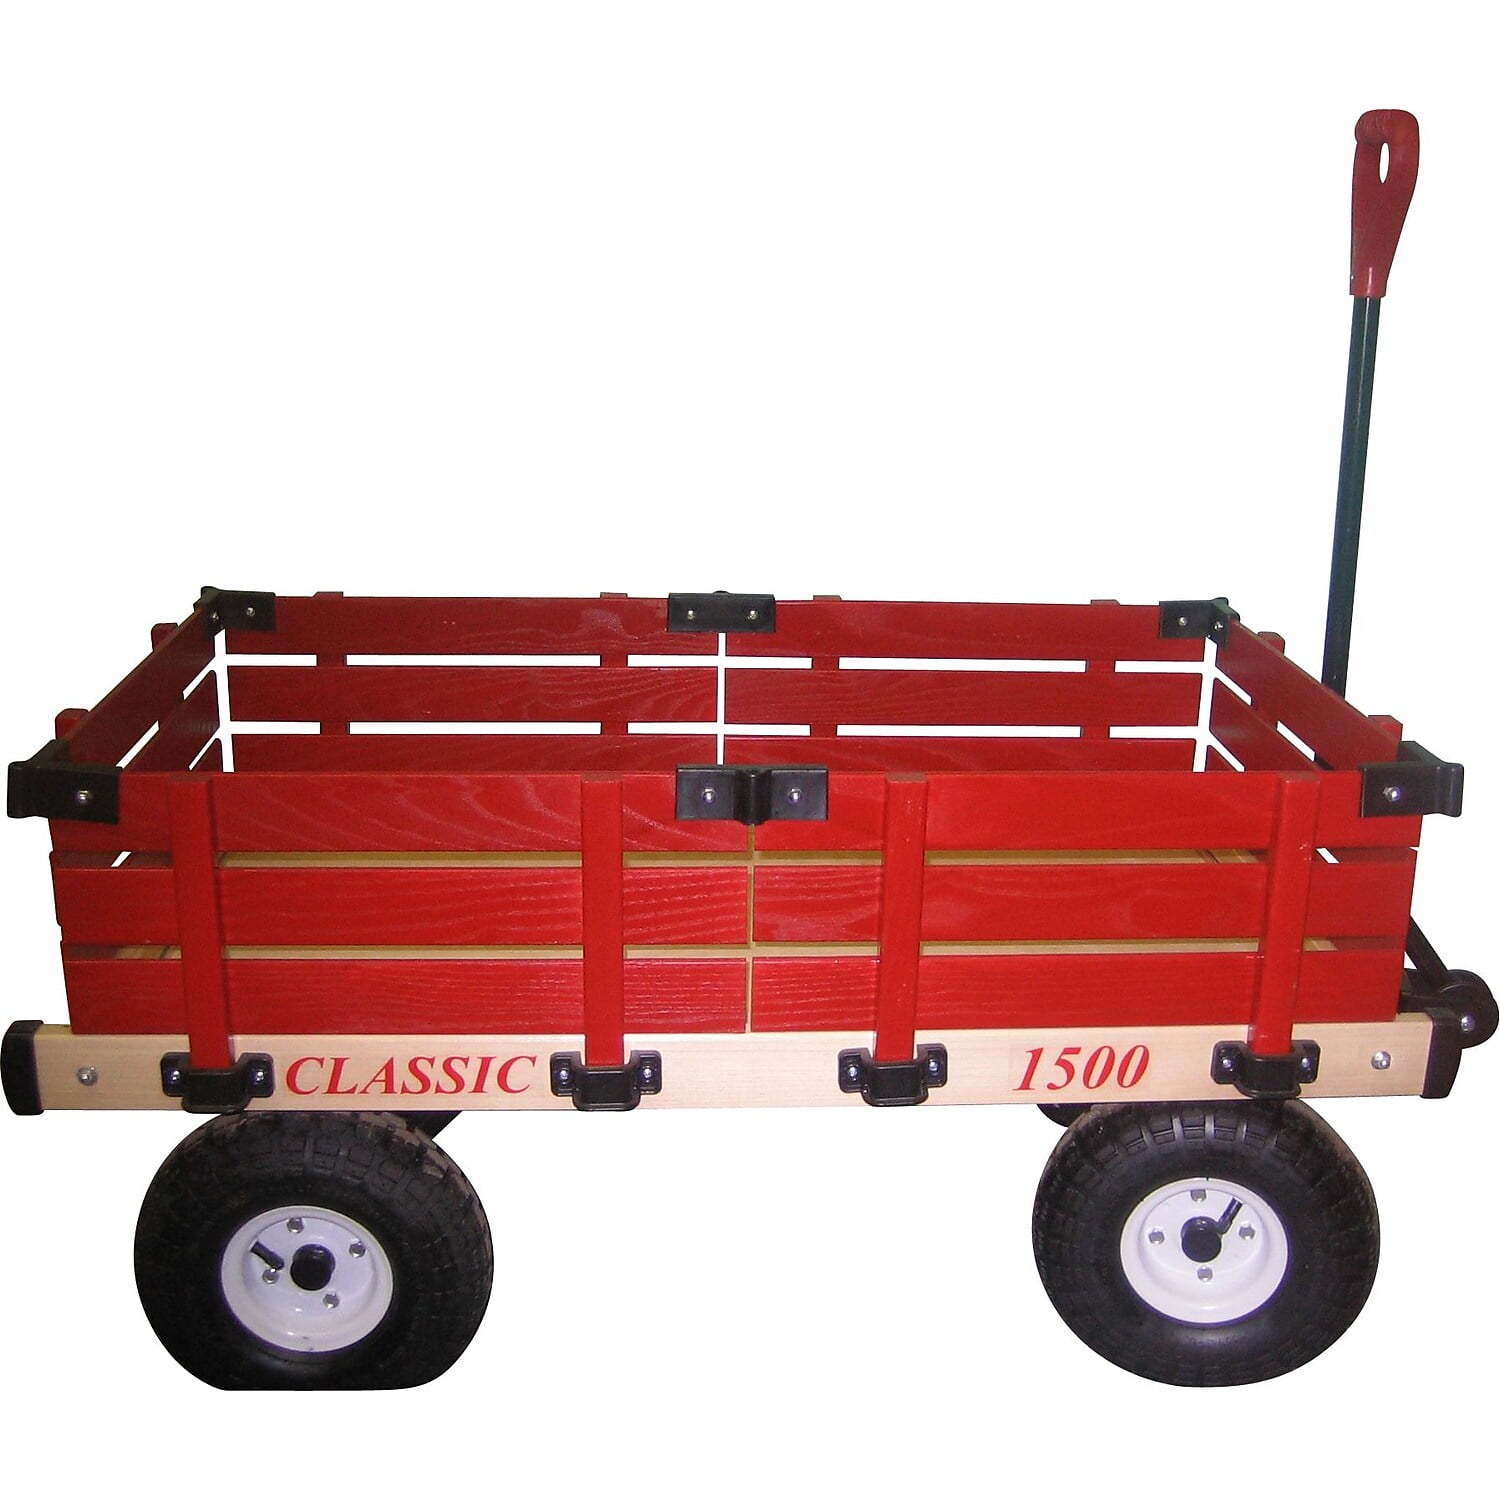 Millside Industries 1500-410 20 in. x 38 in. Wooden Wagon with in. x 10  in. Tires